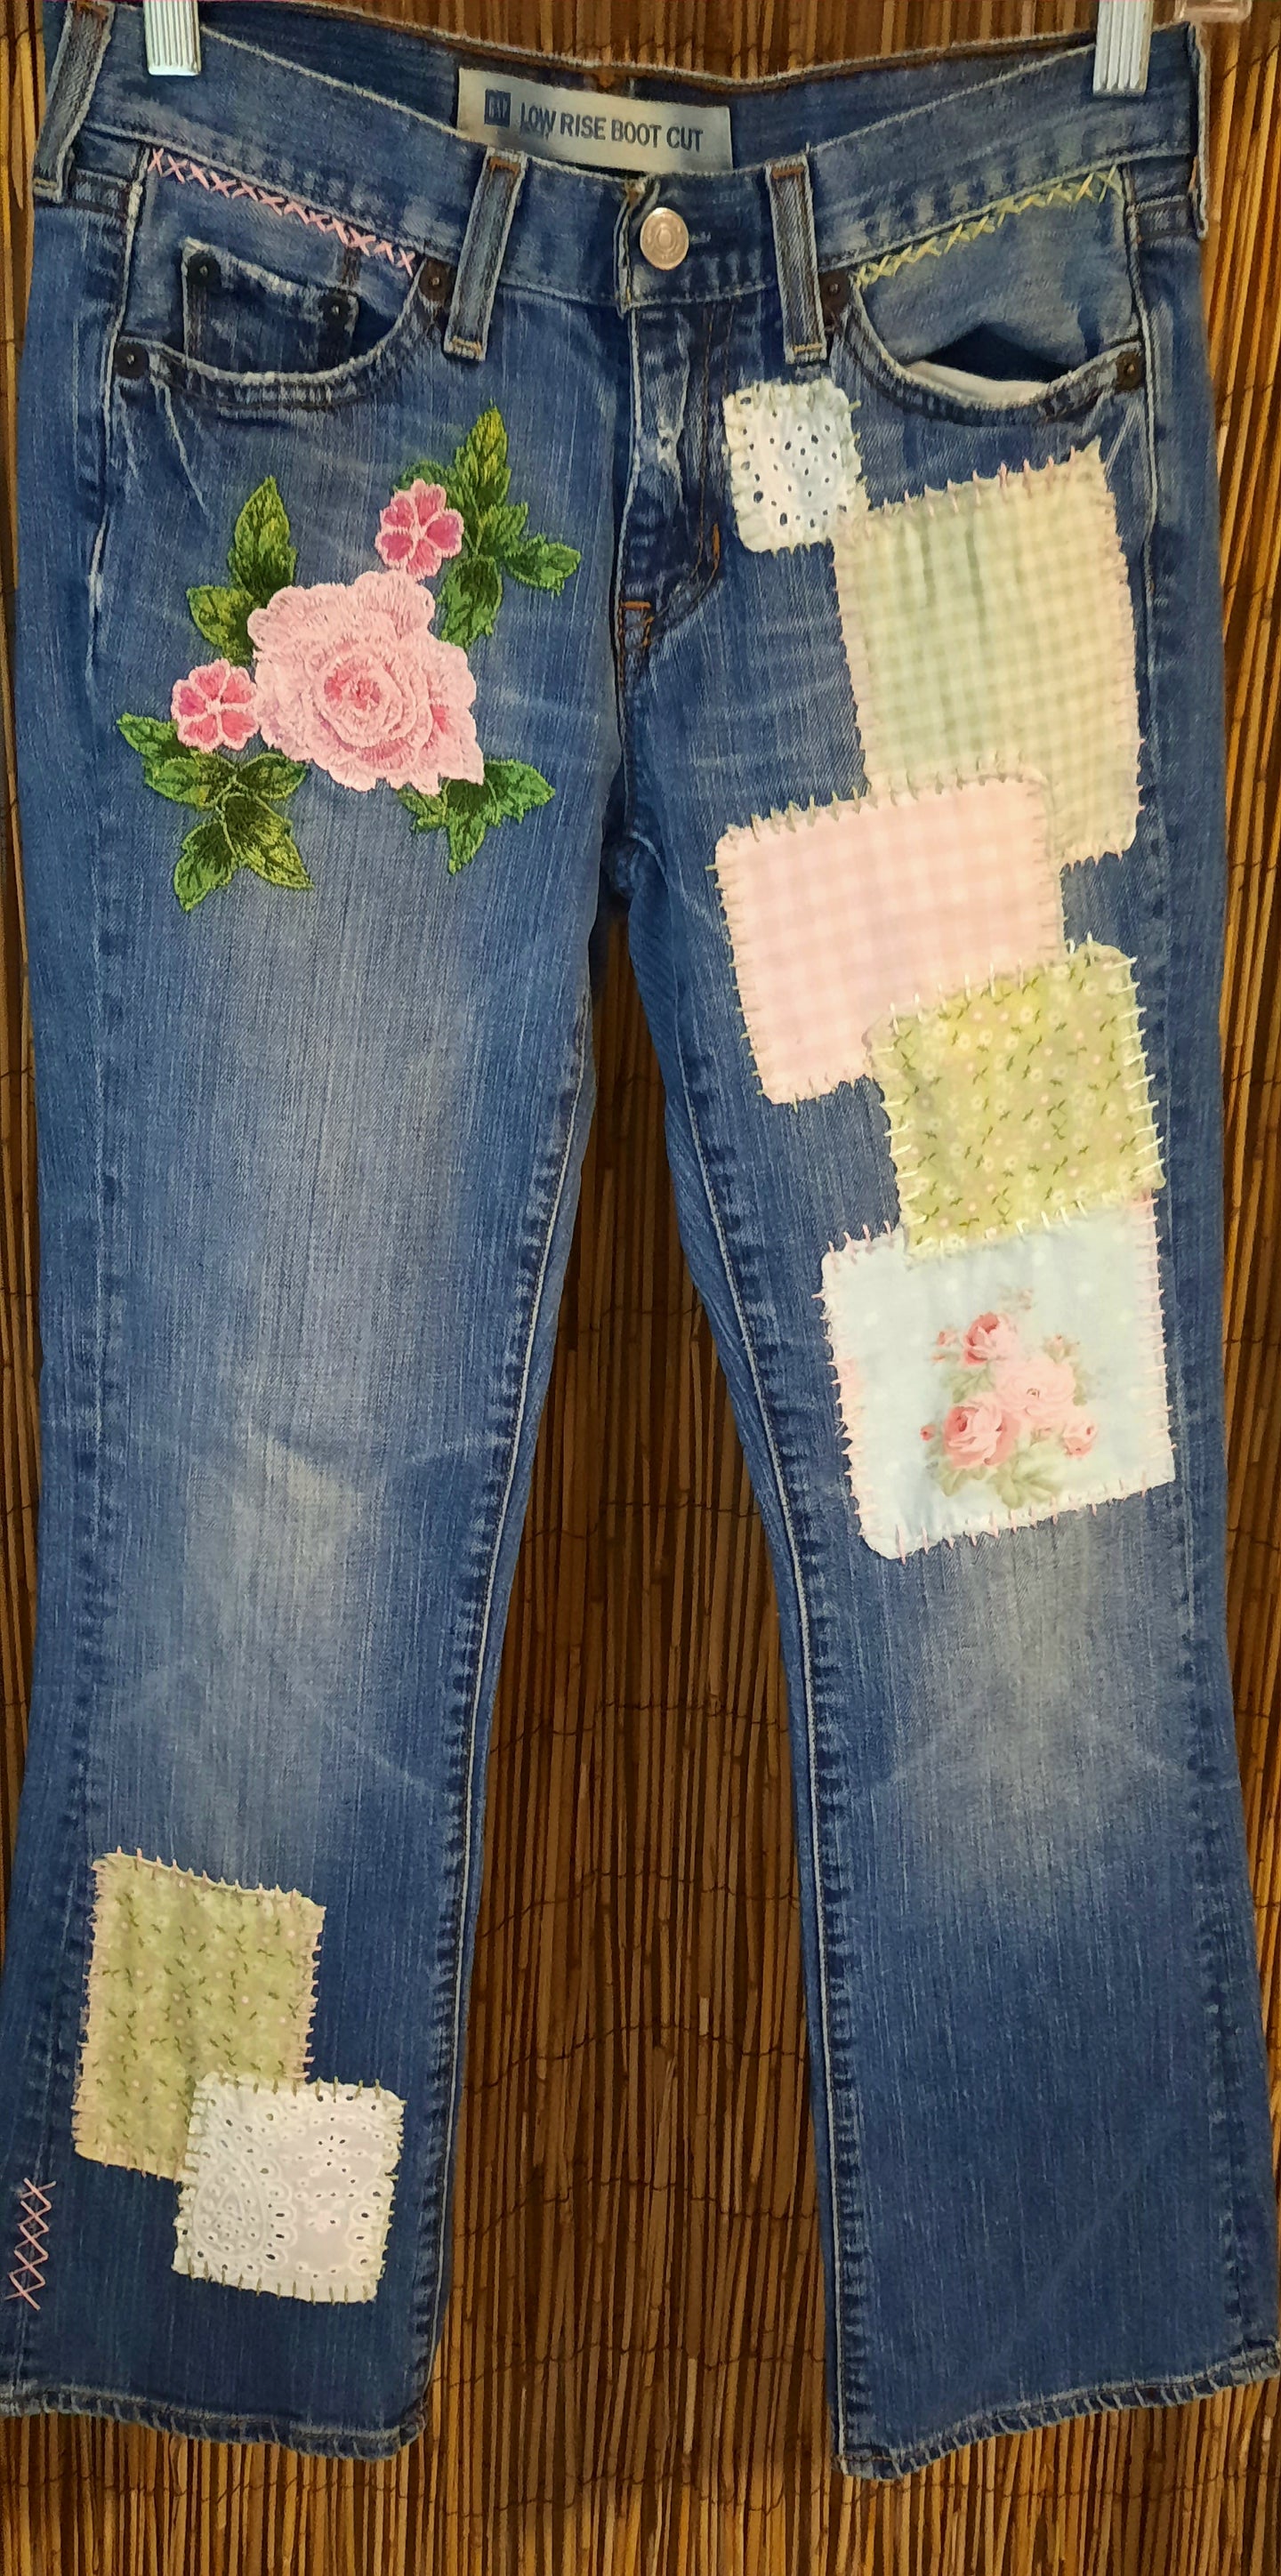 Upcycled/Repurposed/Shabby Chic/Patchwork Jeans/Gap Jeans